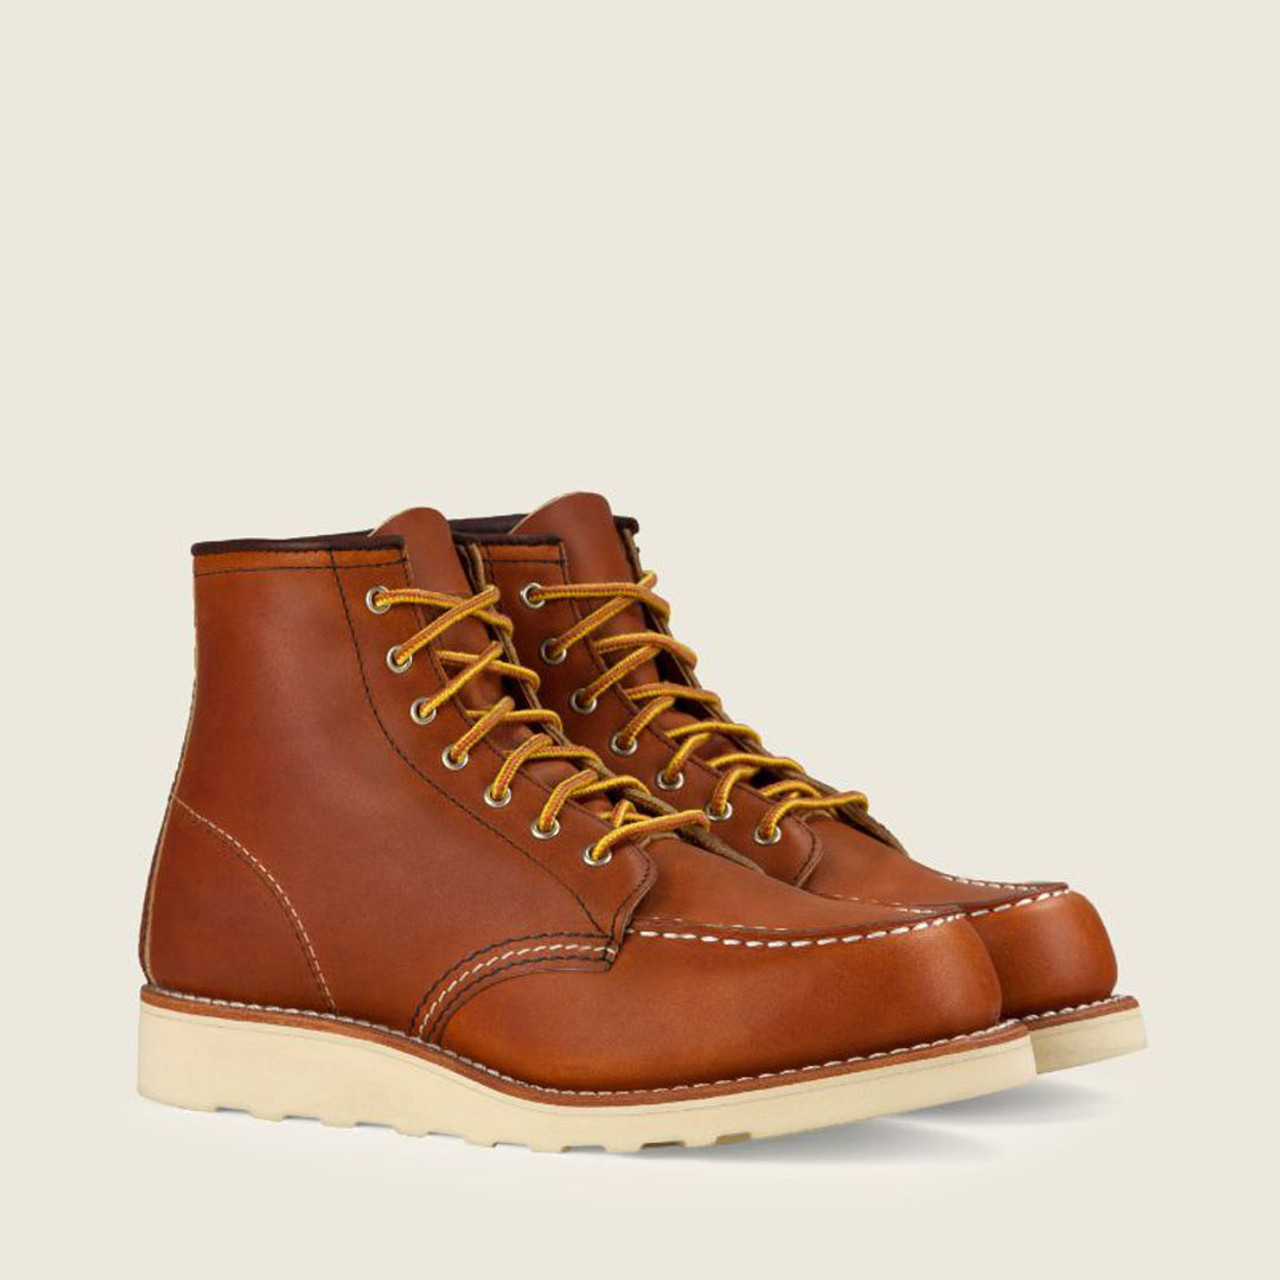 Red Wing Shoes Women's Shoes